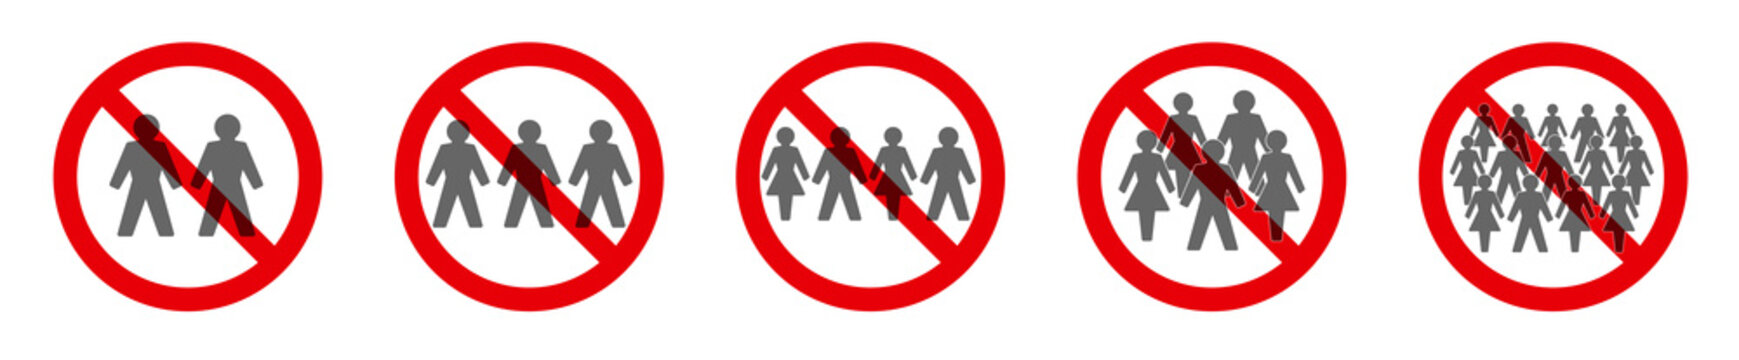 Social distancing - ban on gathering - prohibition of assembly symbols for two, three, four, five or more people. Isolated vector illustration on white background.